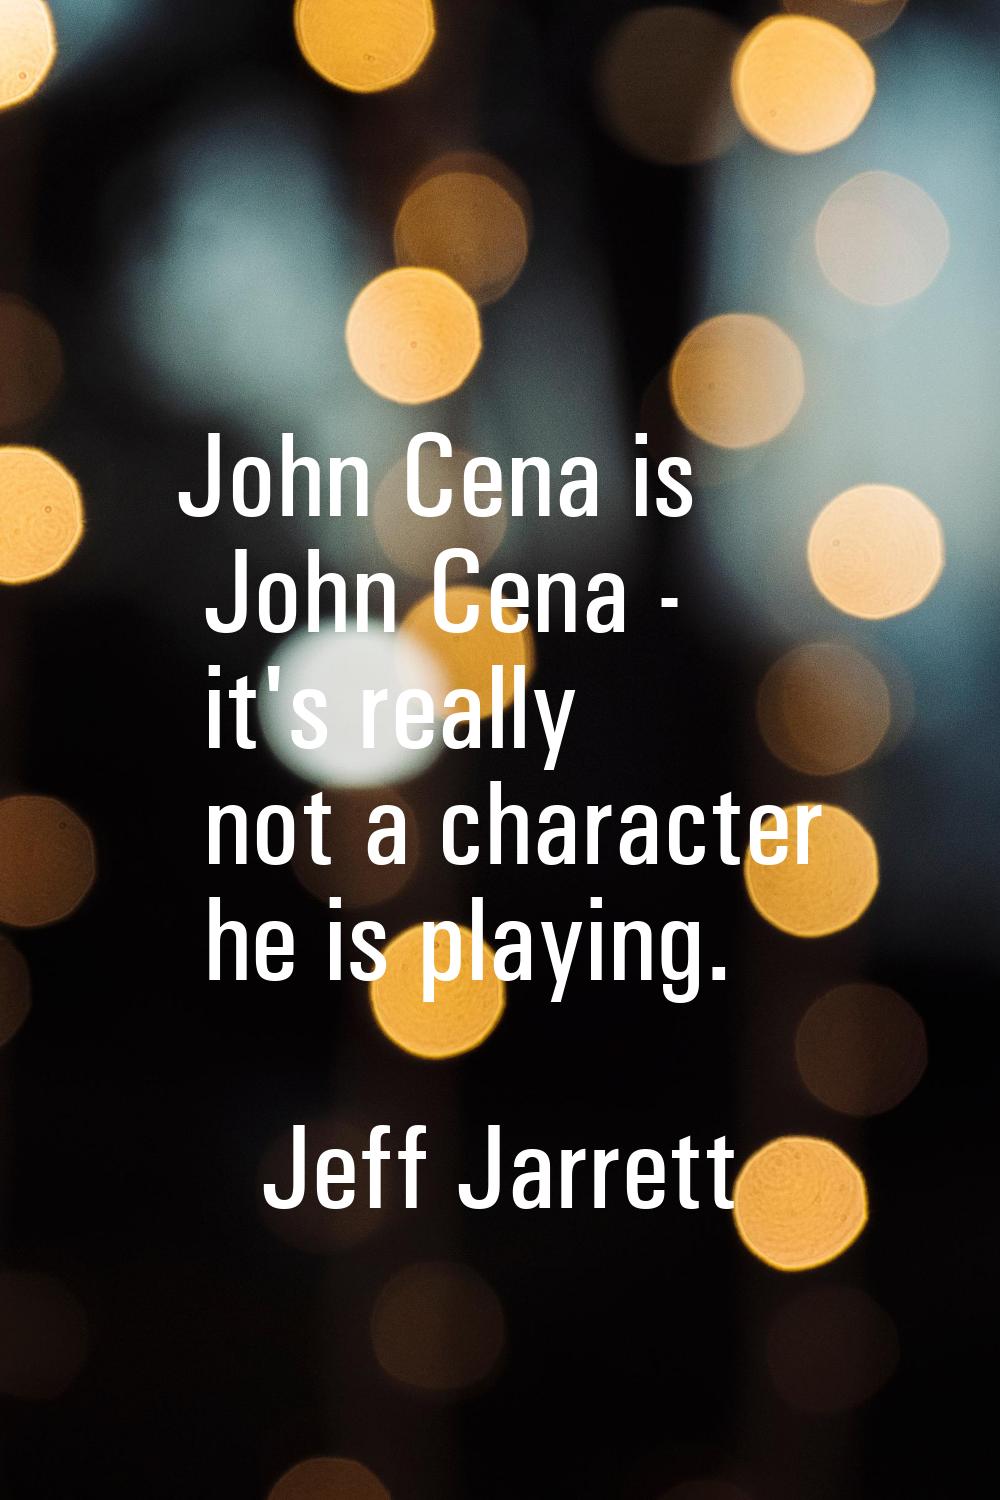 John Cena is John Cena - it's really not a character he is playing.